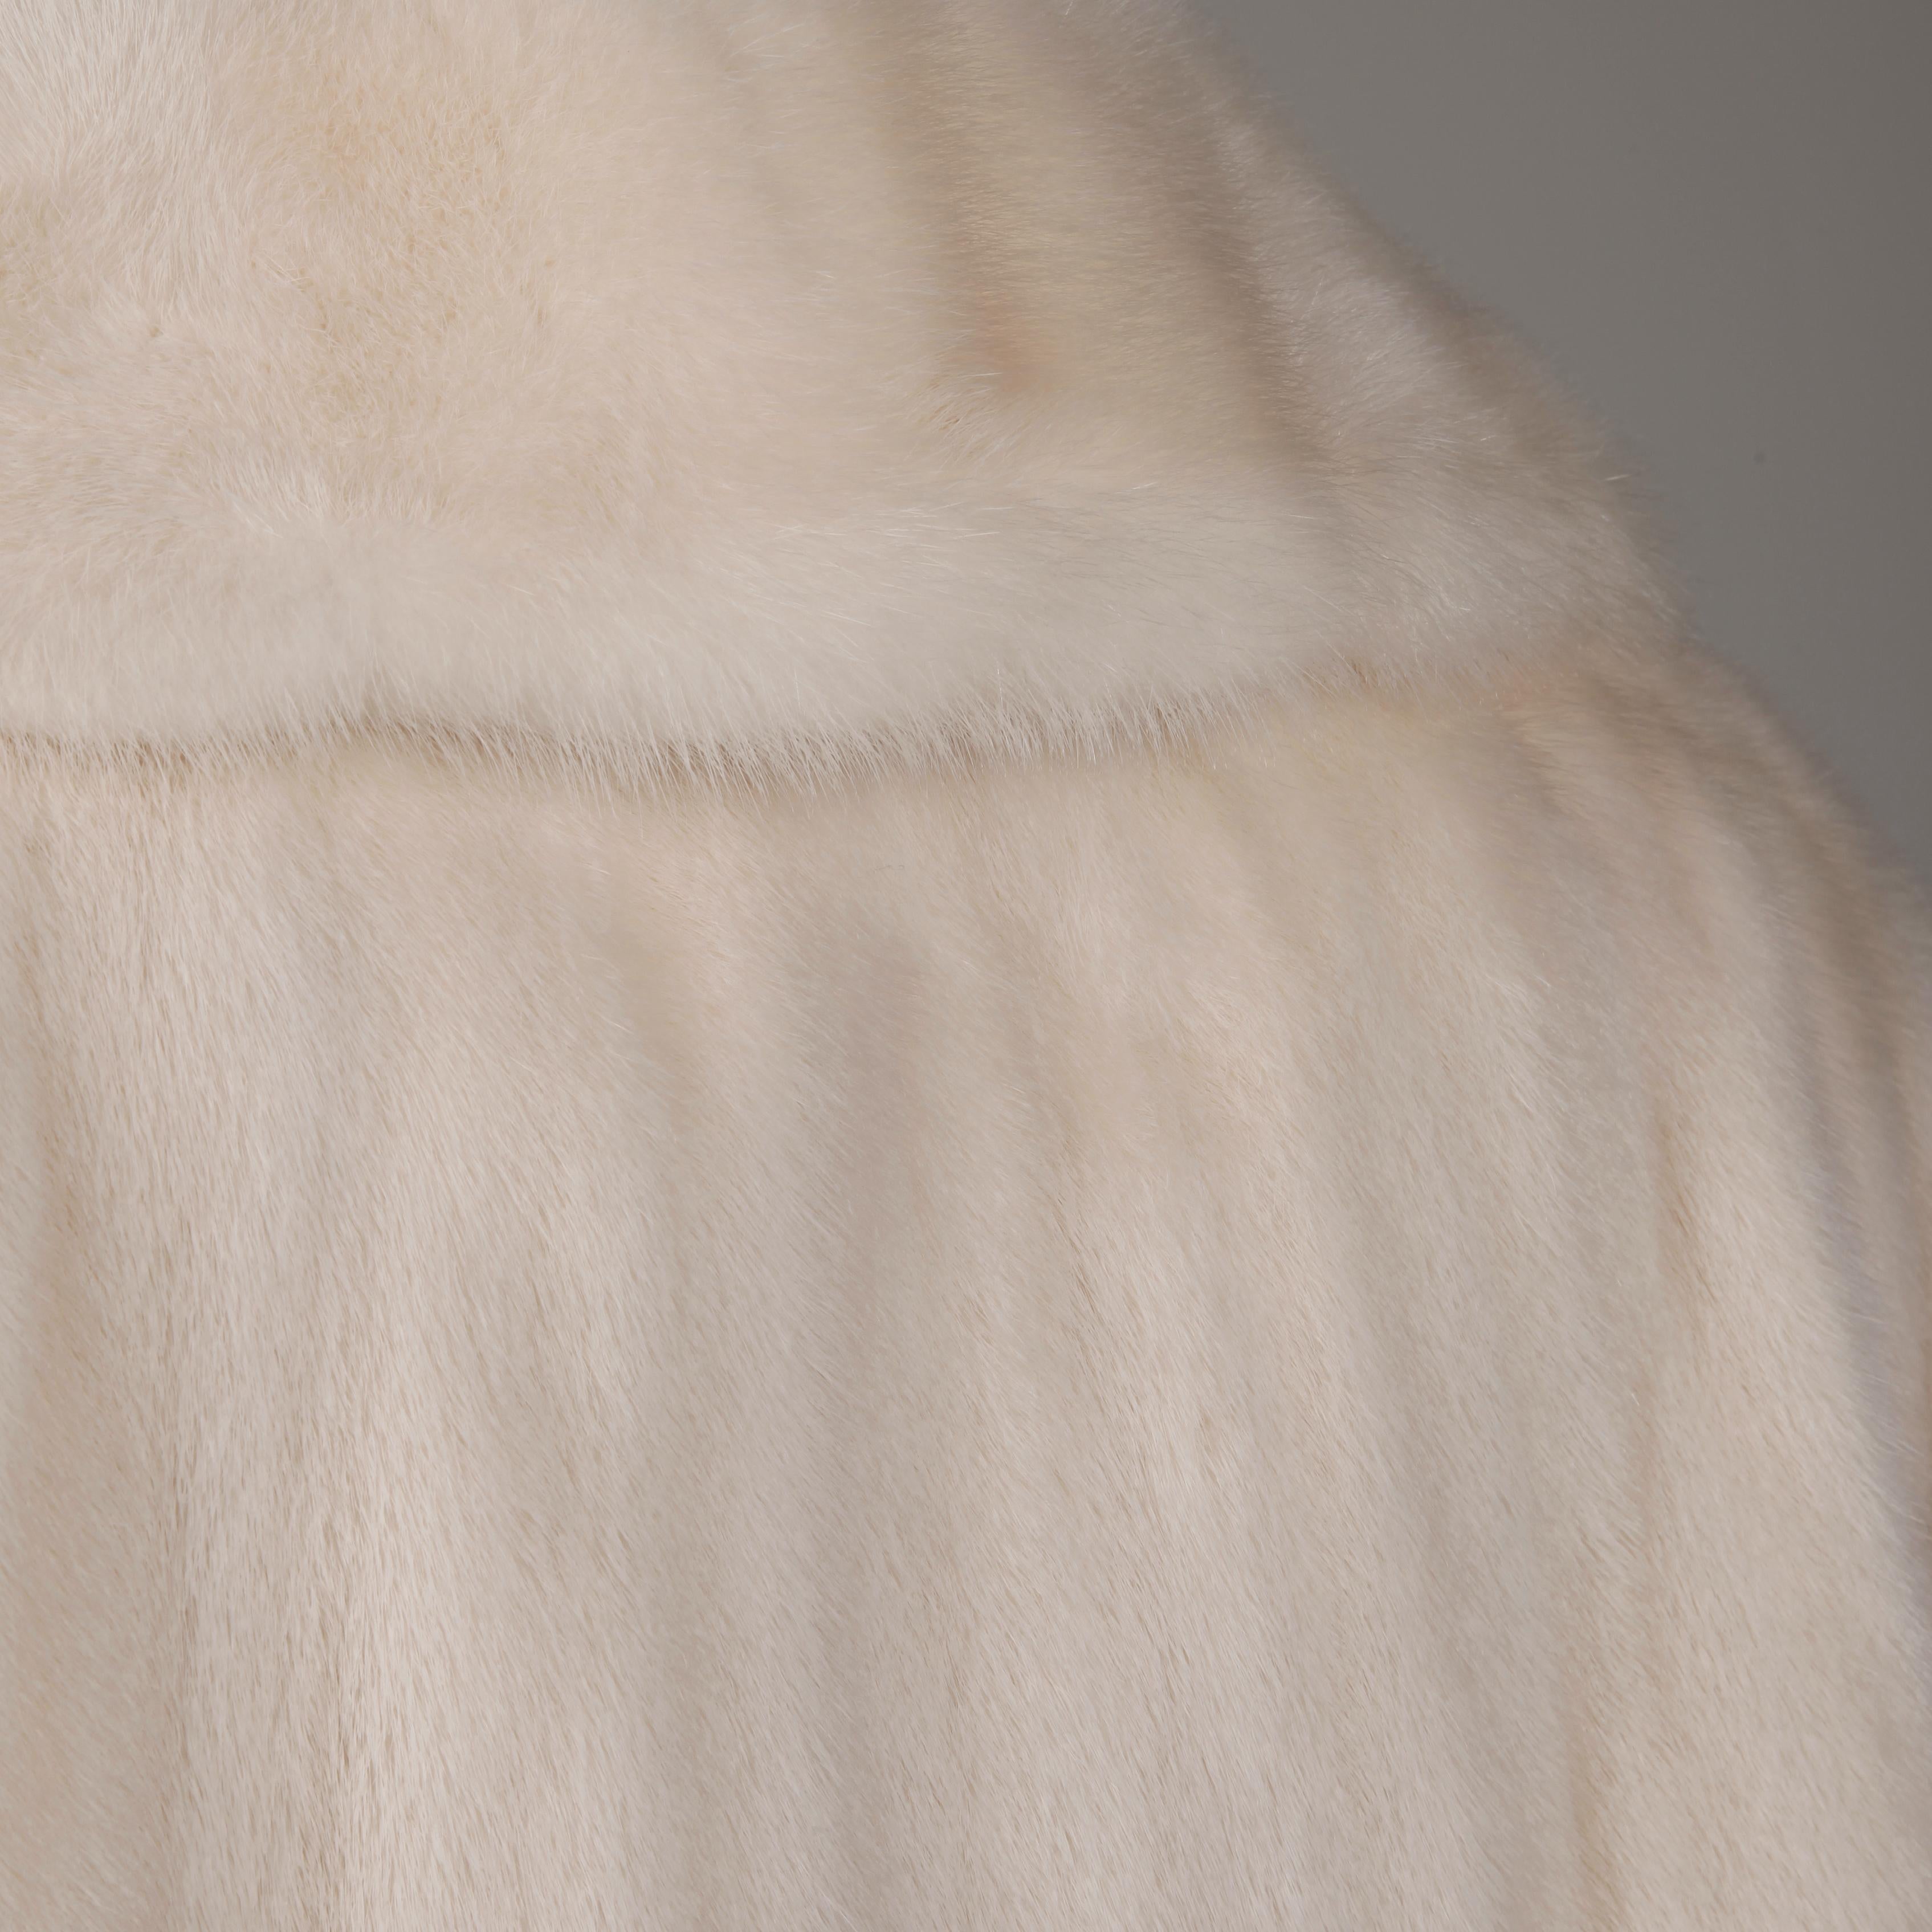 Stunning vintage off-white mink fur coat with a pop up collar (fur on both sides) and flared swing shape. This coat has been kept in cold storage and is in beautiful condition with no drying to the pelts or oxidation. The fur is a beautiful